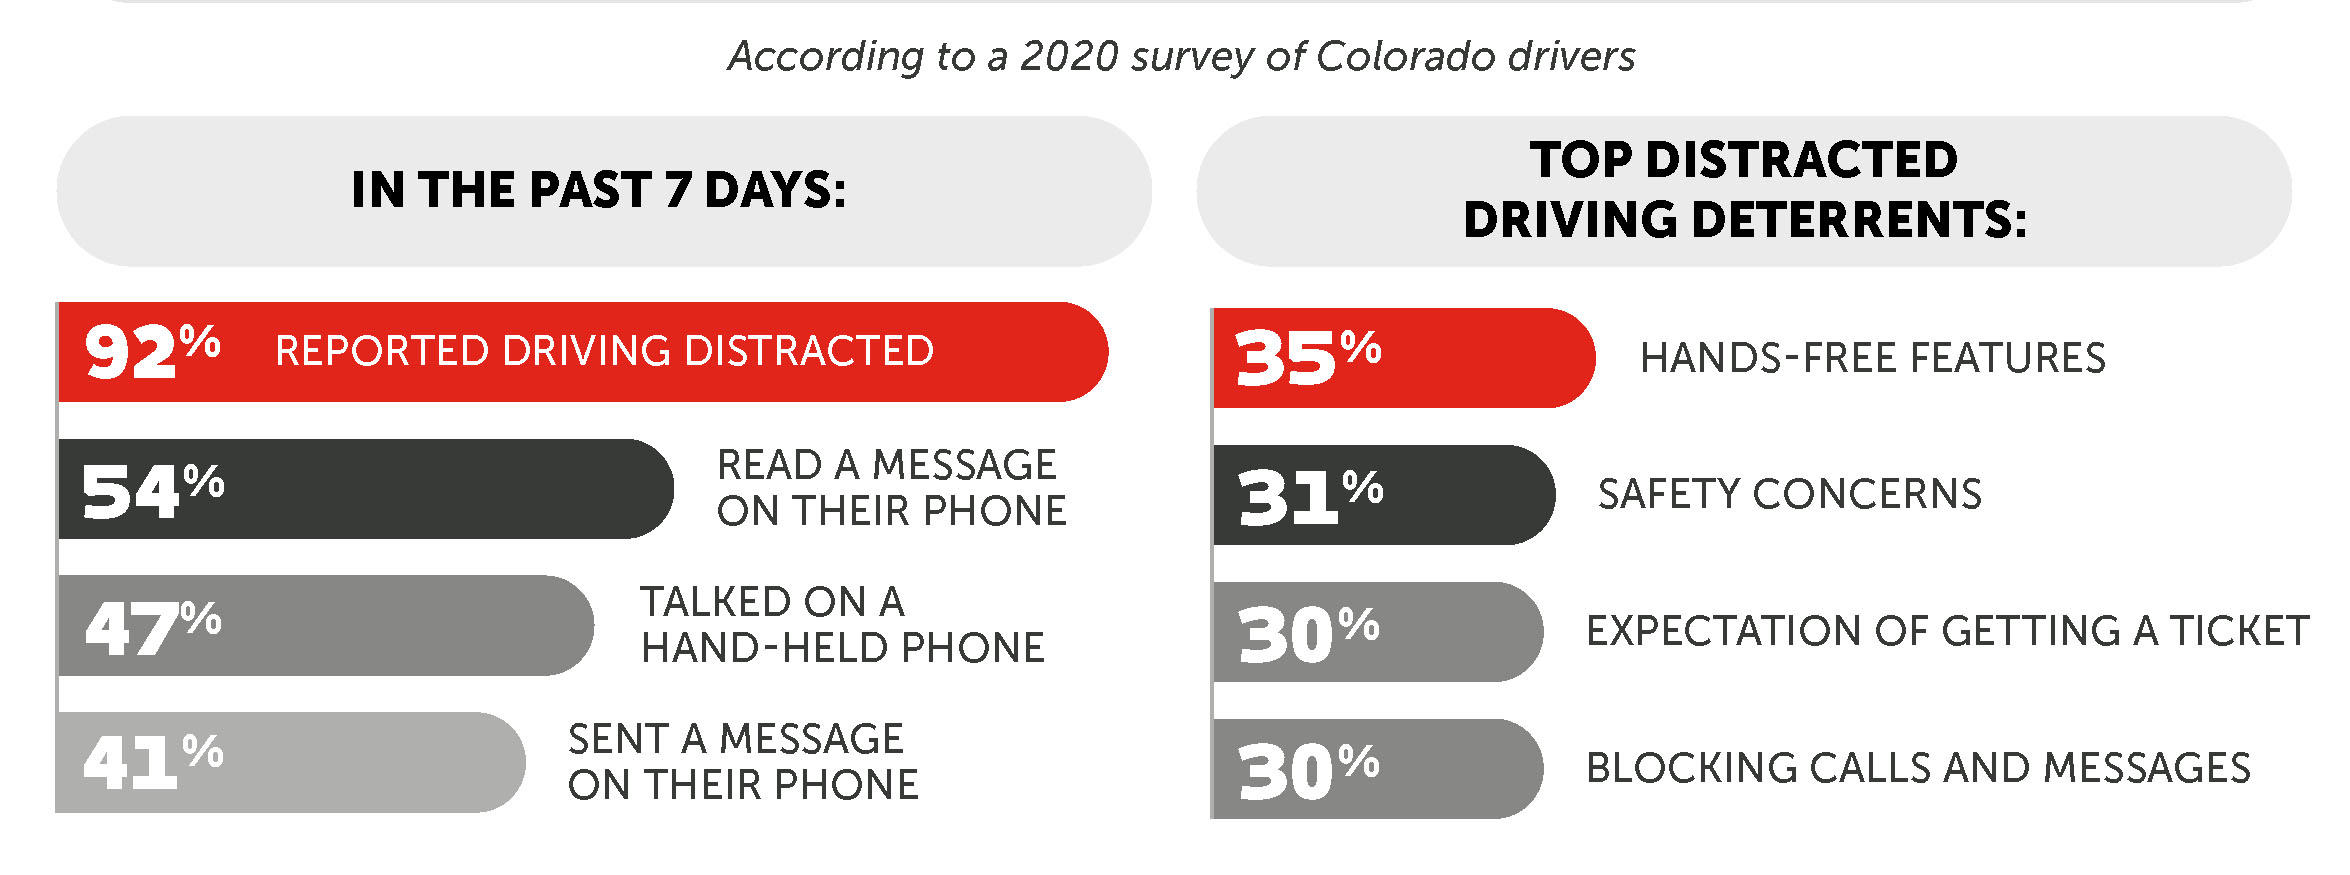 Distracted Driving Survey Graphs.jpg detail image